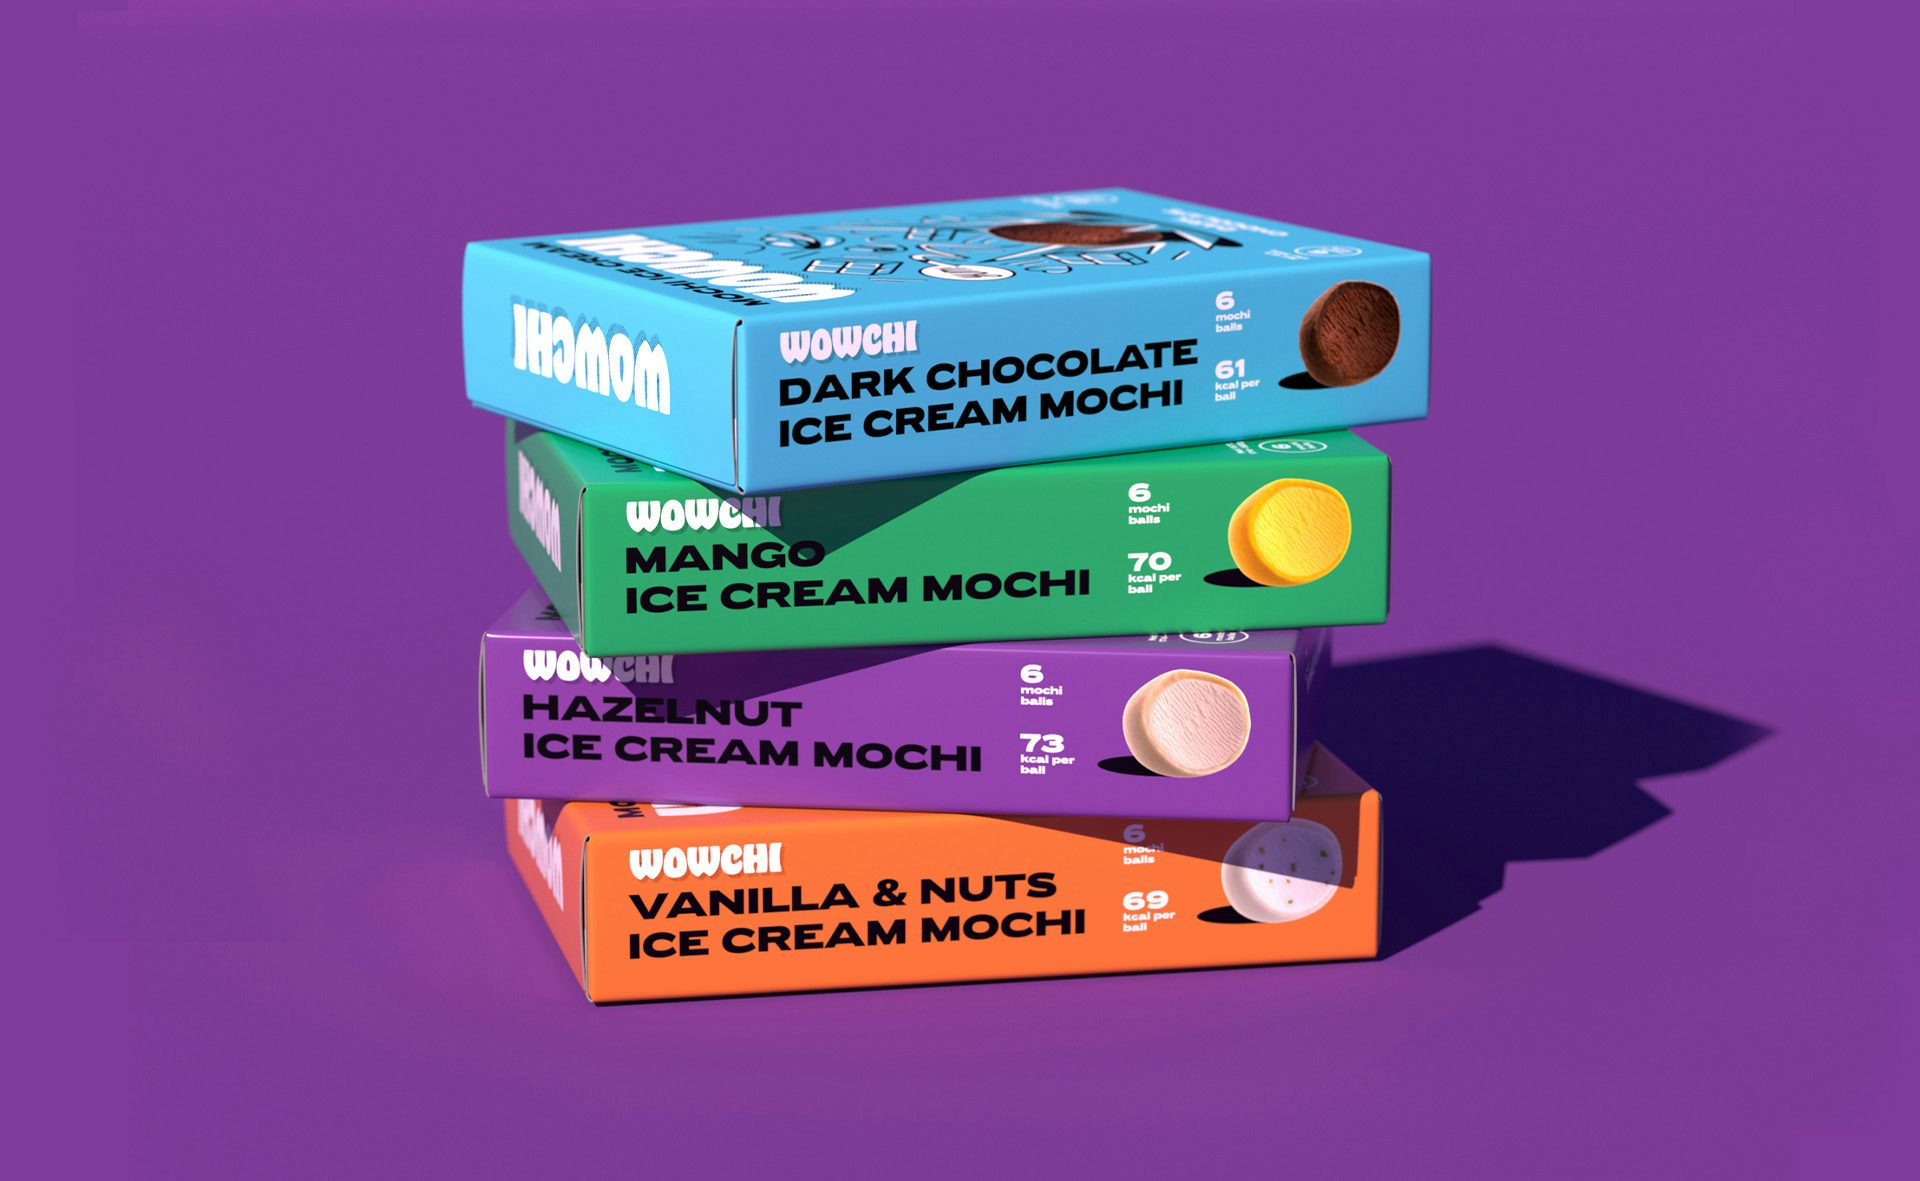 Image shows a stock of Wowchi mochi boxes in green, orange, blue and purple packaging with line illustrations and mochi balls on the front, shown against a bright purple background